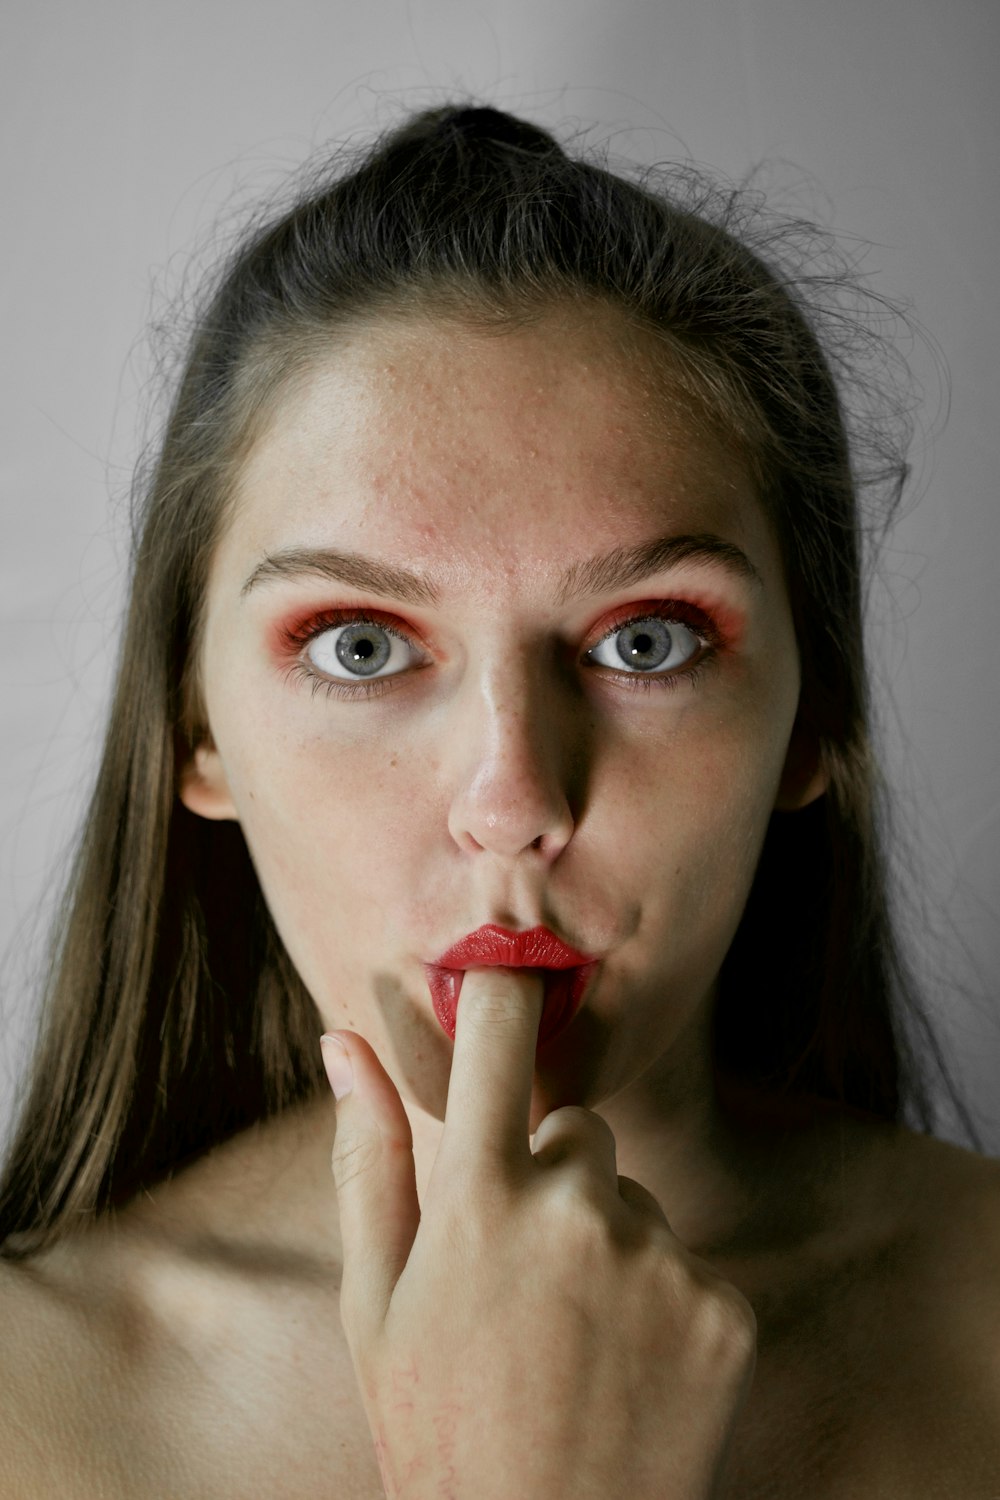 woman with finger on mouth inside room